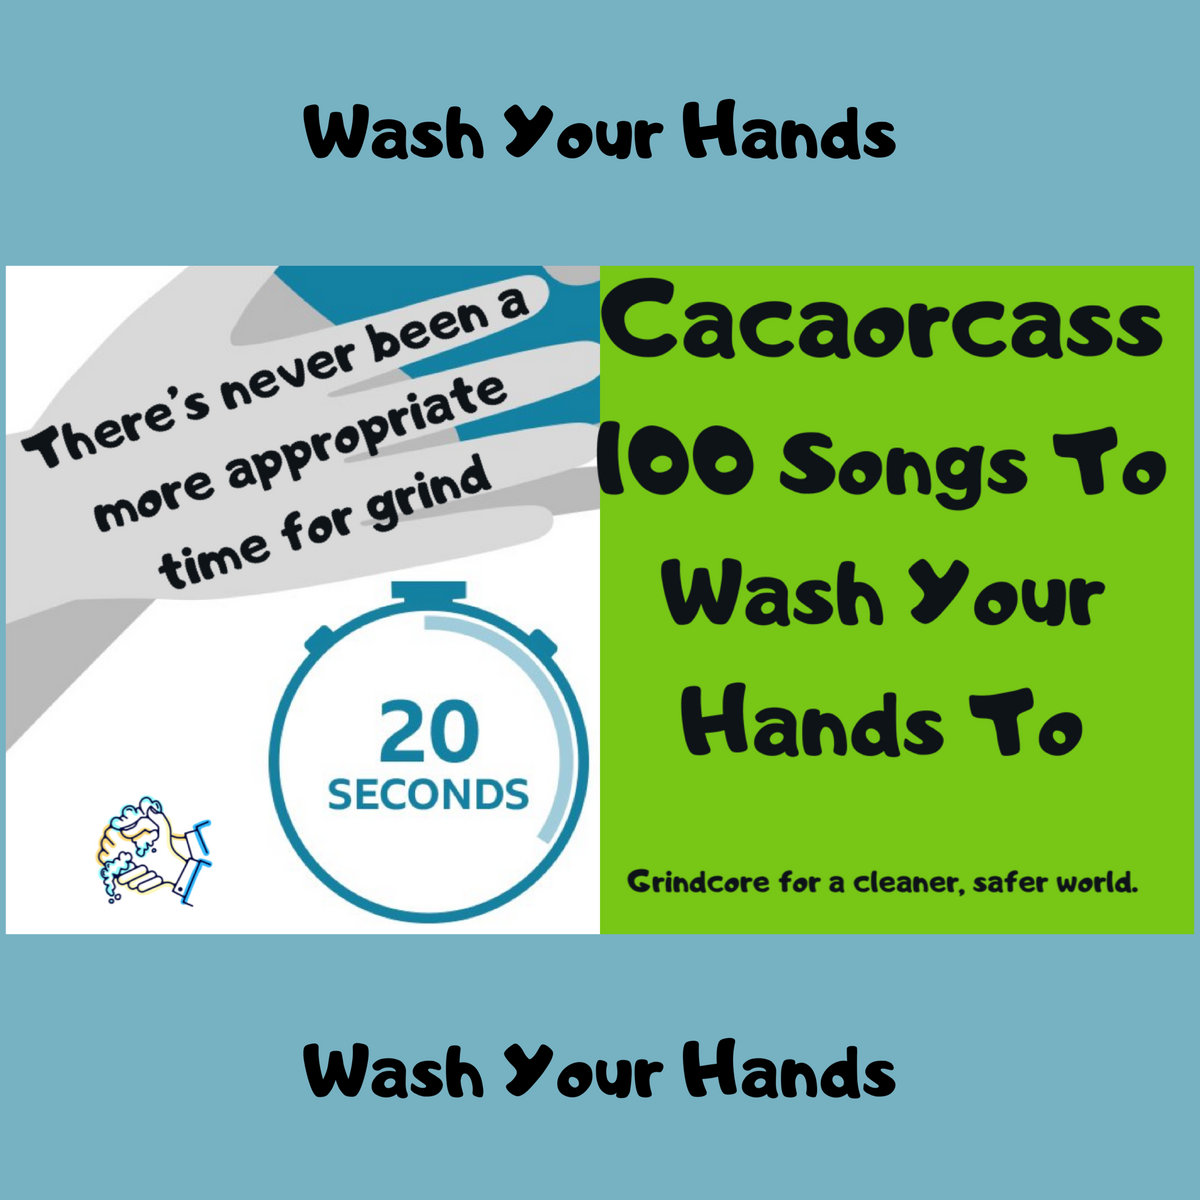 CACAORCASS - 100 Songs to Wash Your Hands to cover 